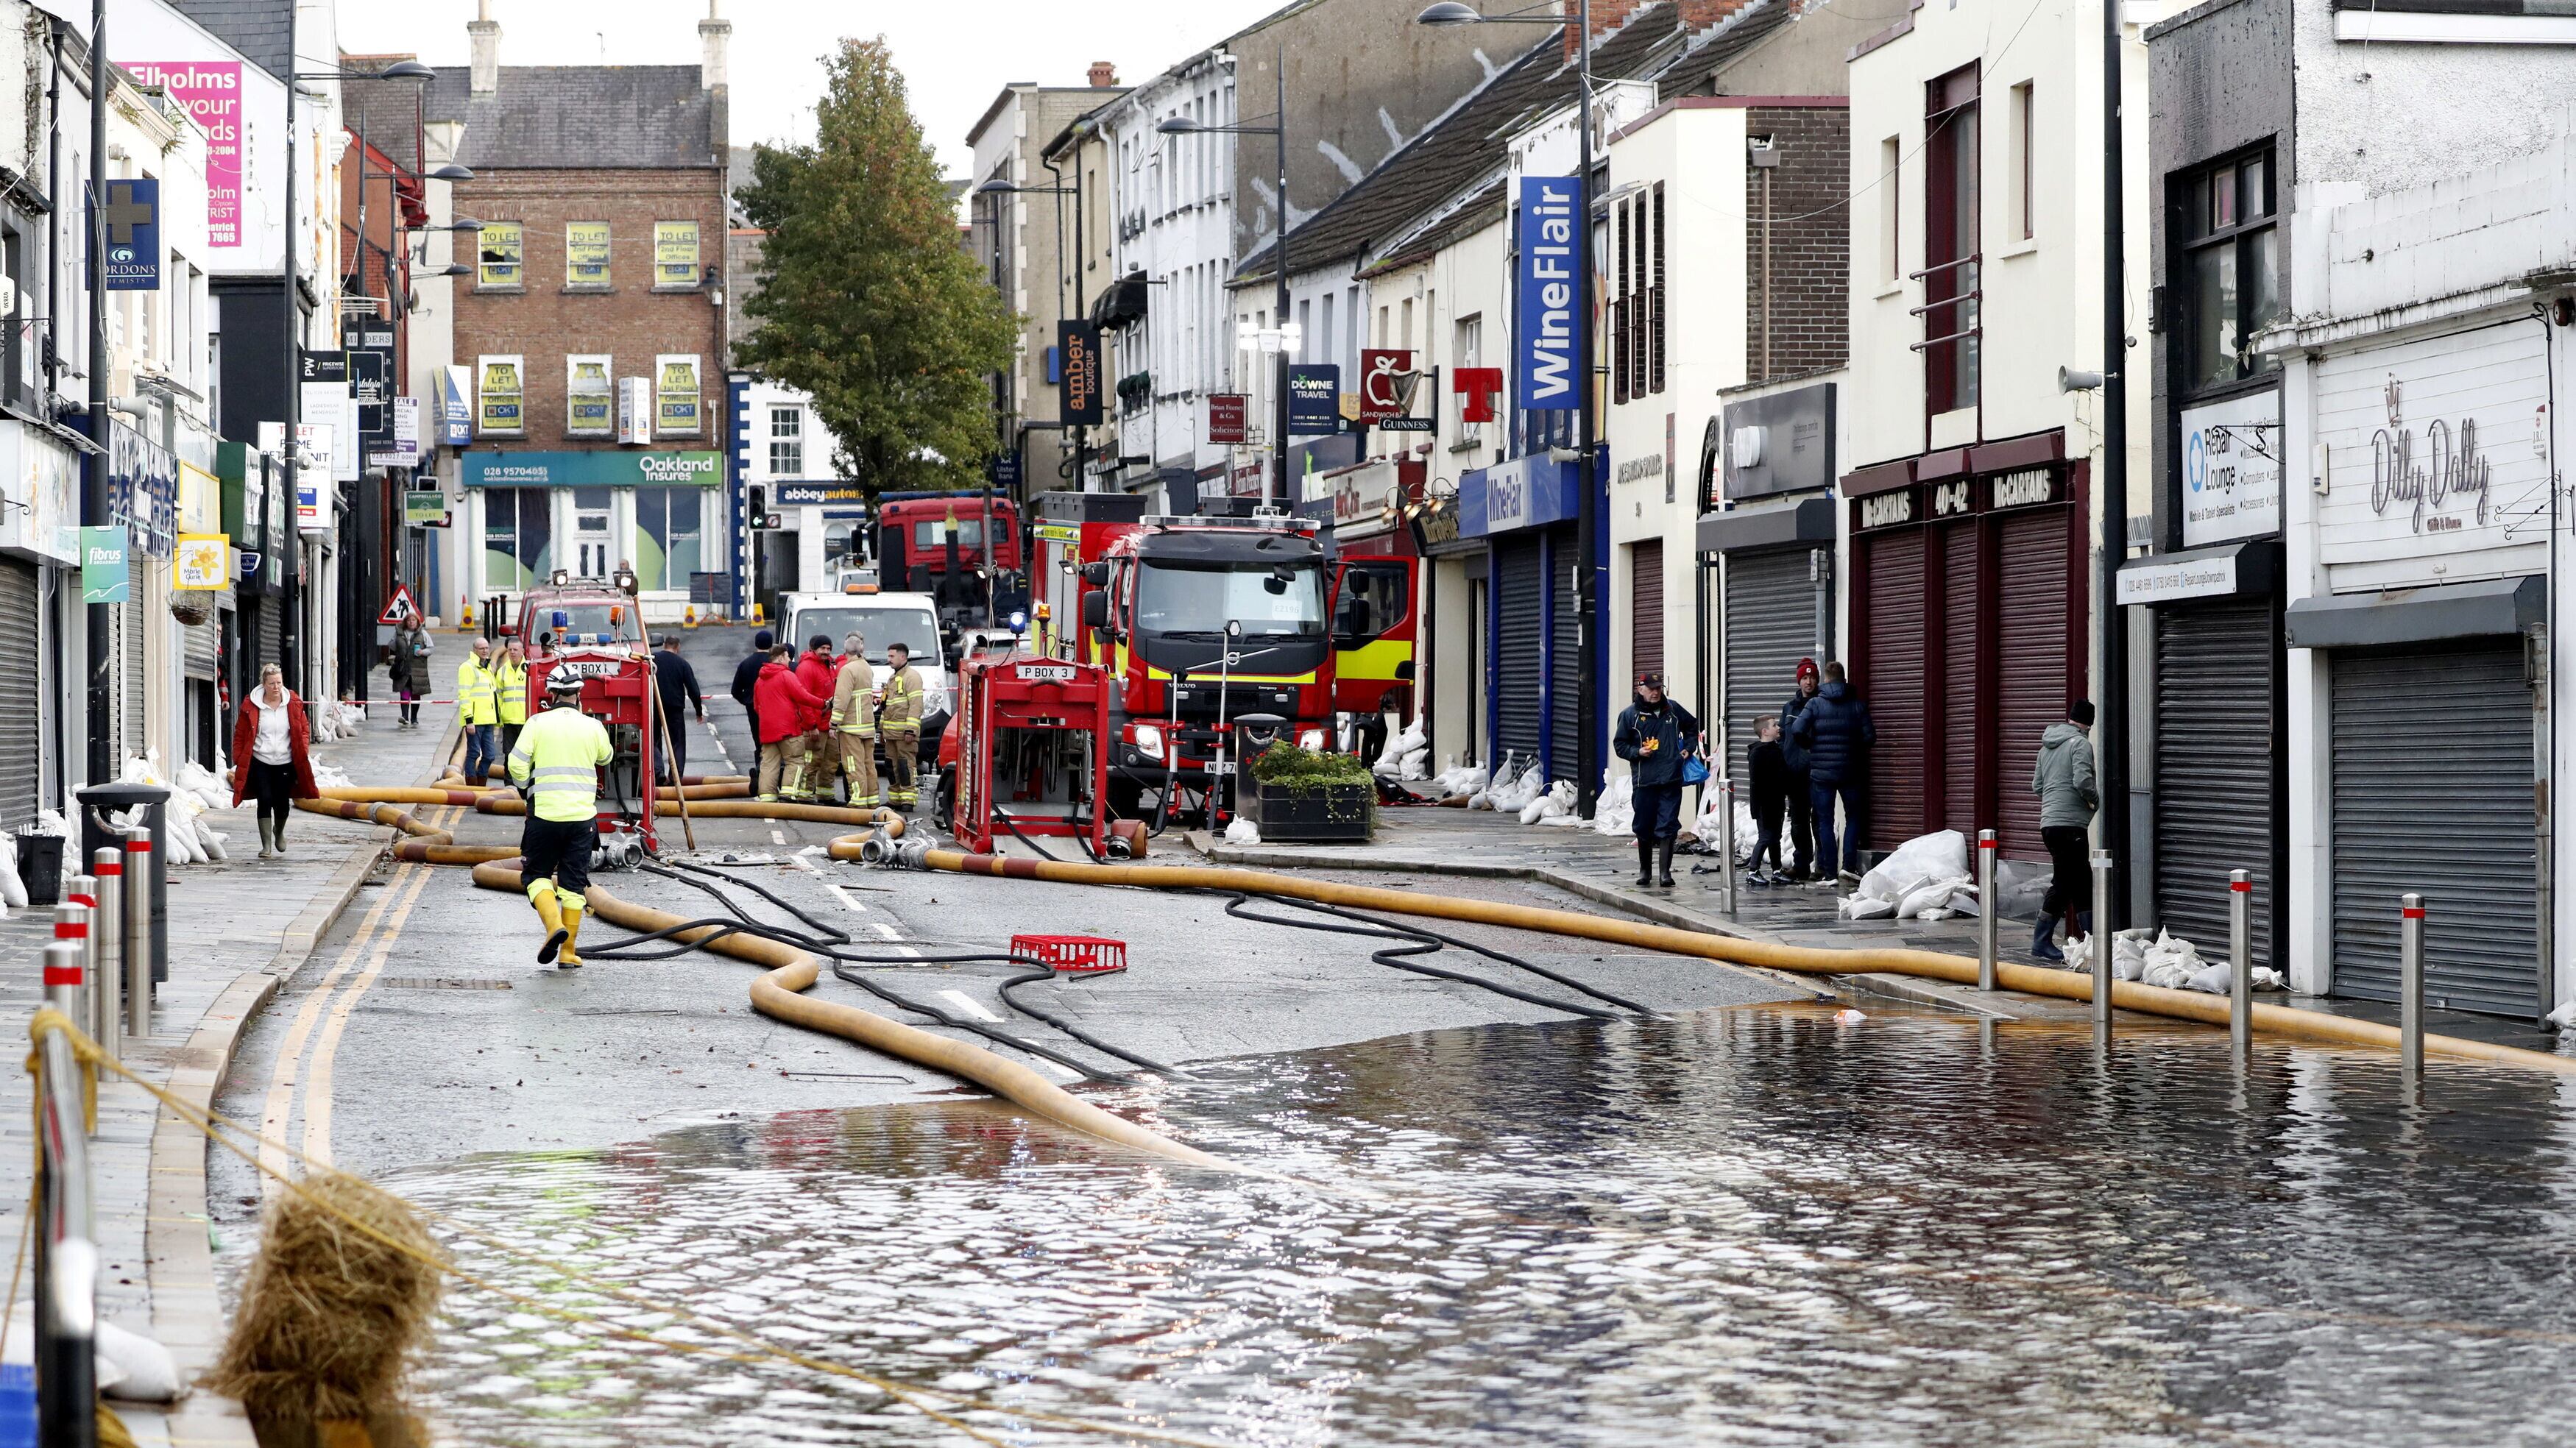 Downpatrick was heavily affected by flooding. Picture by Peter Morrison/PA